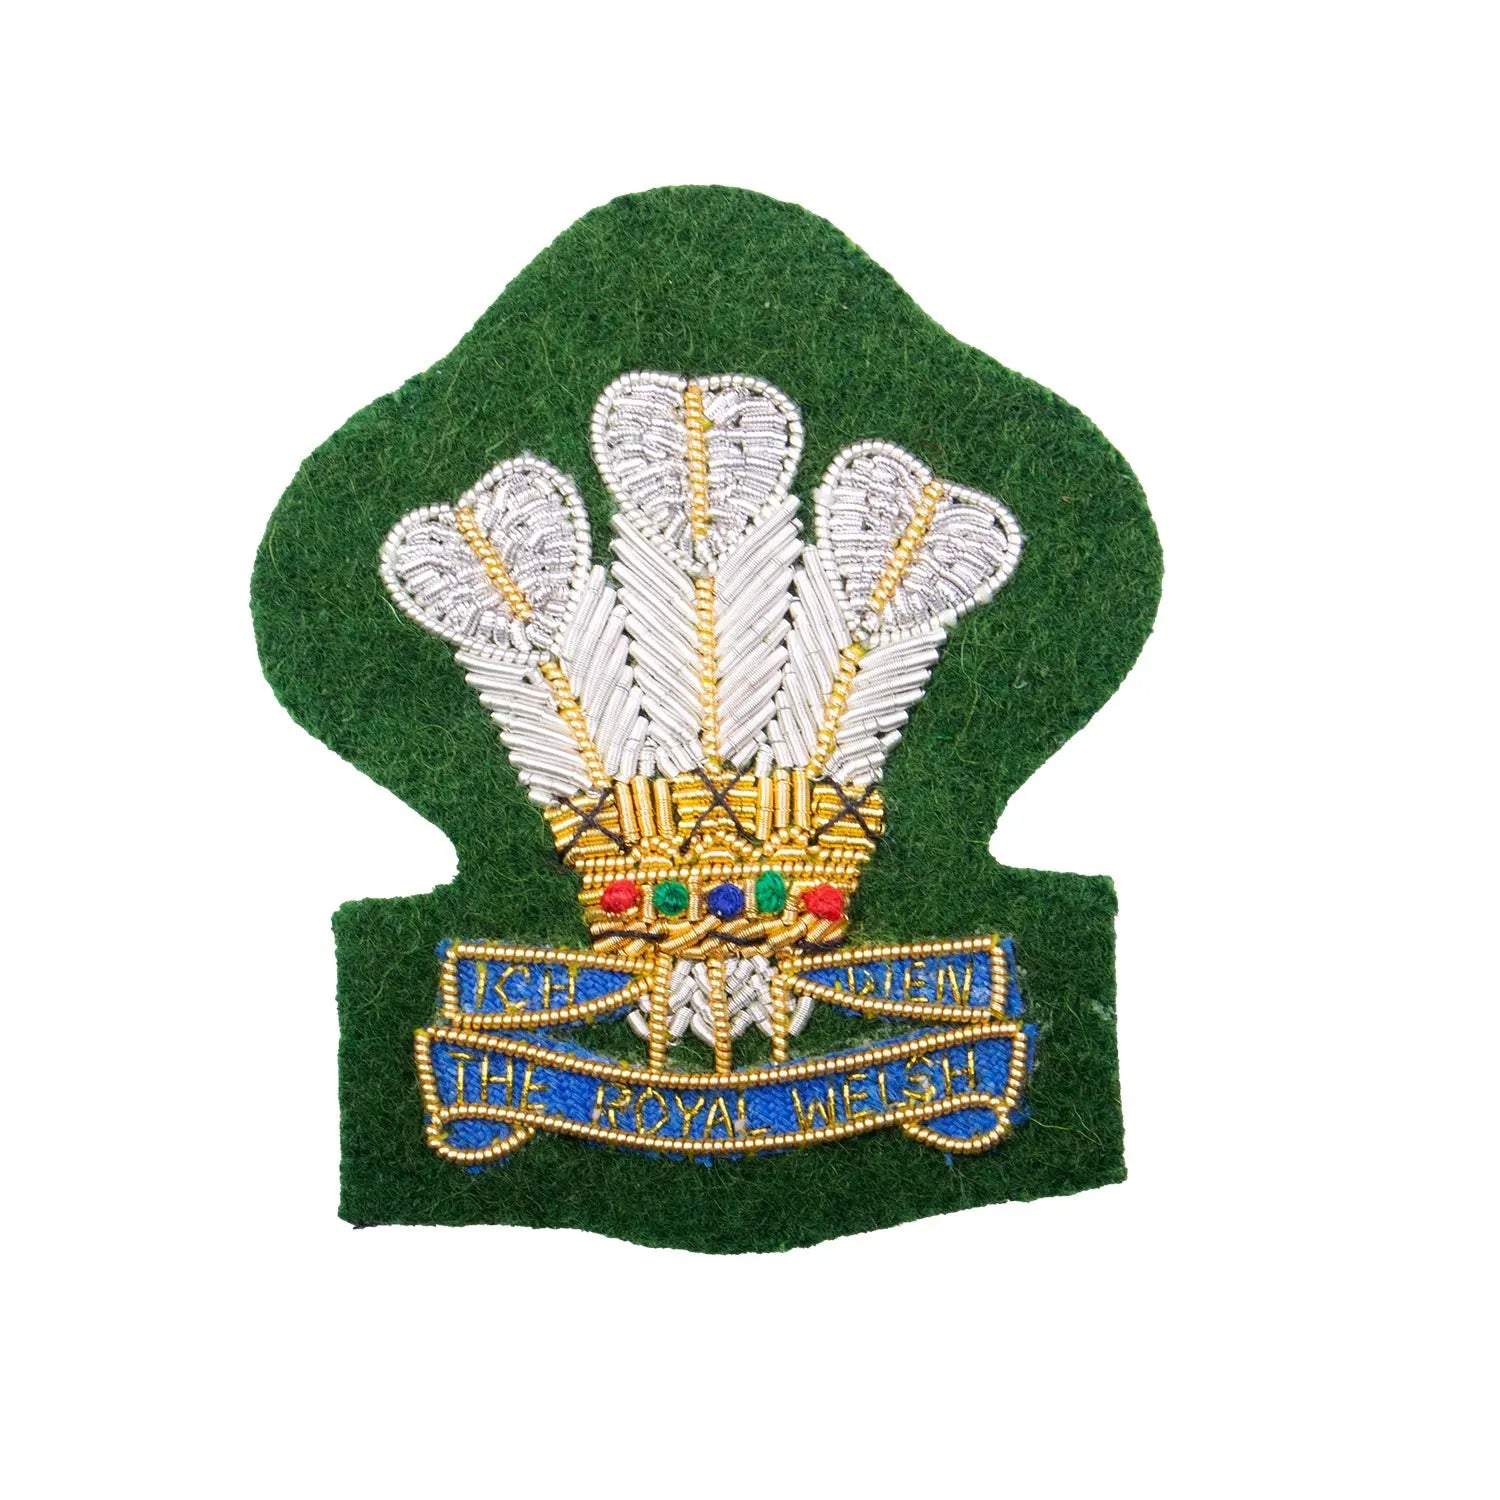 Royal Welsh Regiment Officer Feathers & Scroll Cap Badge Wyedean